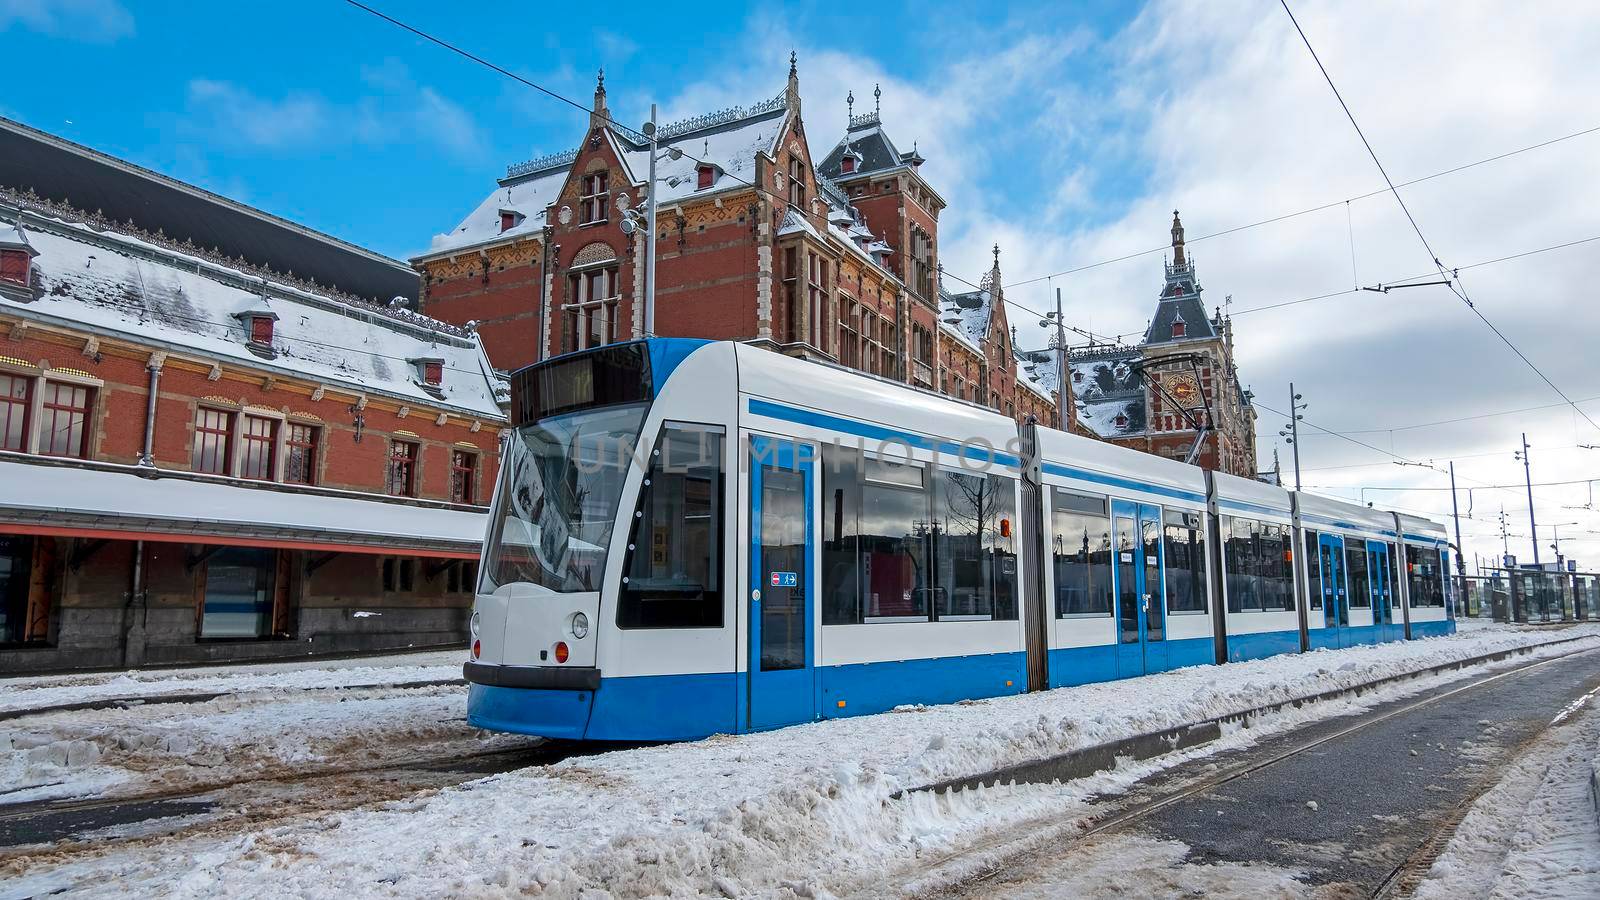 Tram waiting in winter in front of the Central Station in Amsterdam the Netherlands by devy